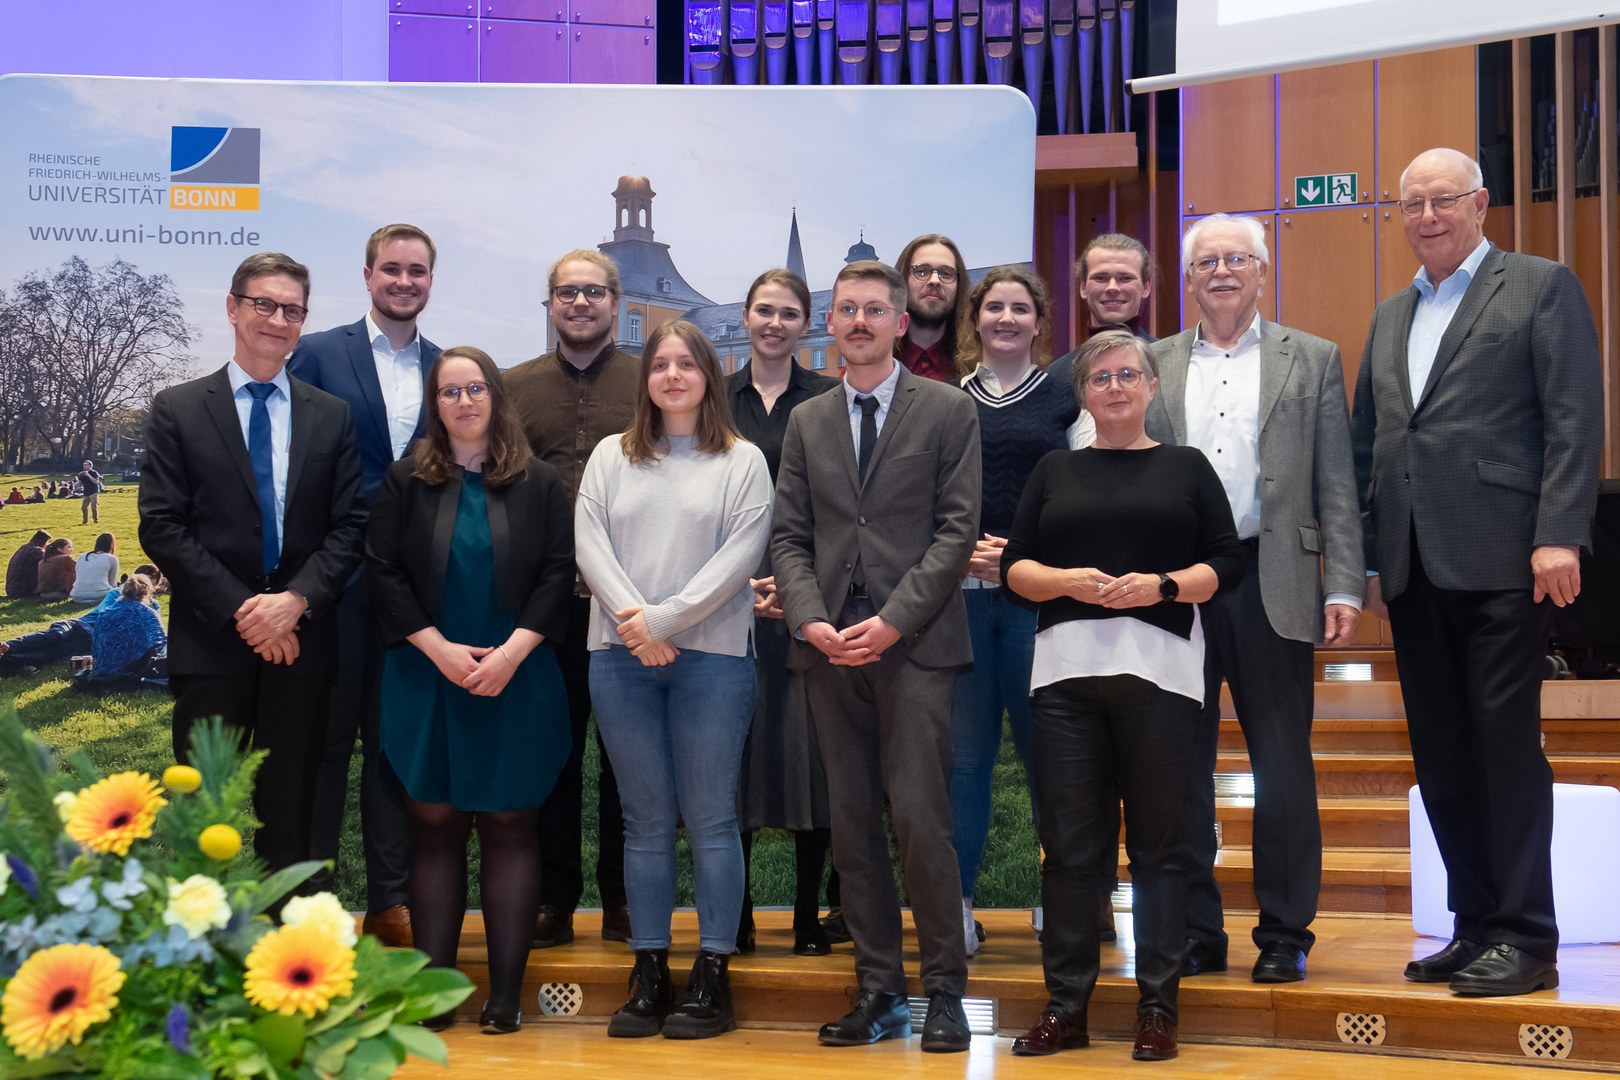 Outstanding doctoral theses and student engagement were rewarded at the traditional winter soirée organized by the Universitätsgesellschaft Bonn (UGB). - The UGB Chairperson Michael Kranz (right), with the prize winners and members of the selection committee.